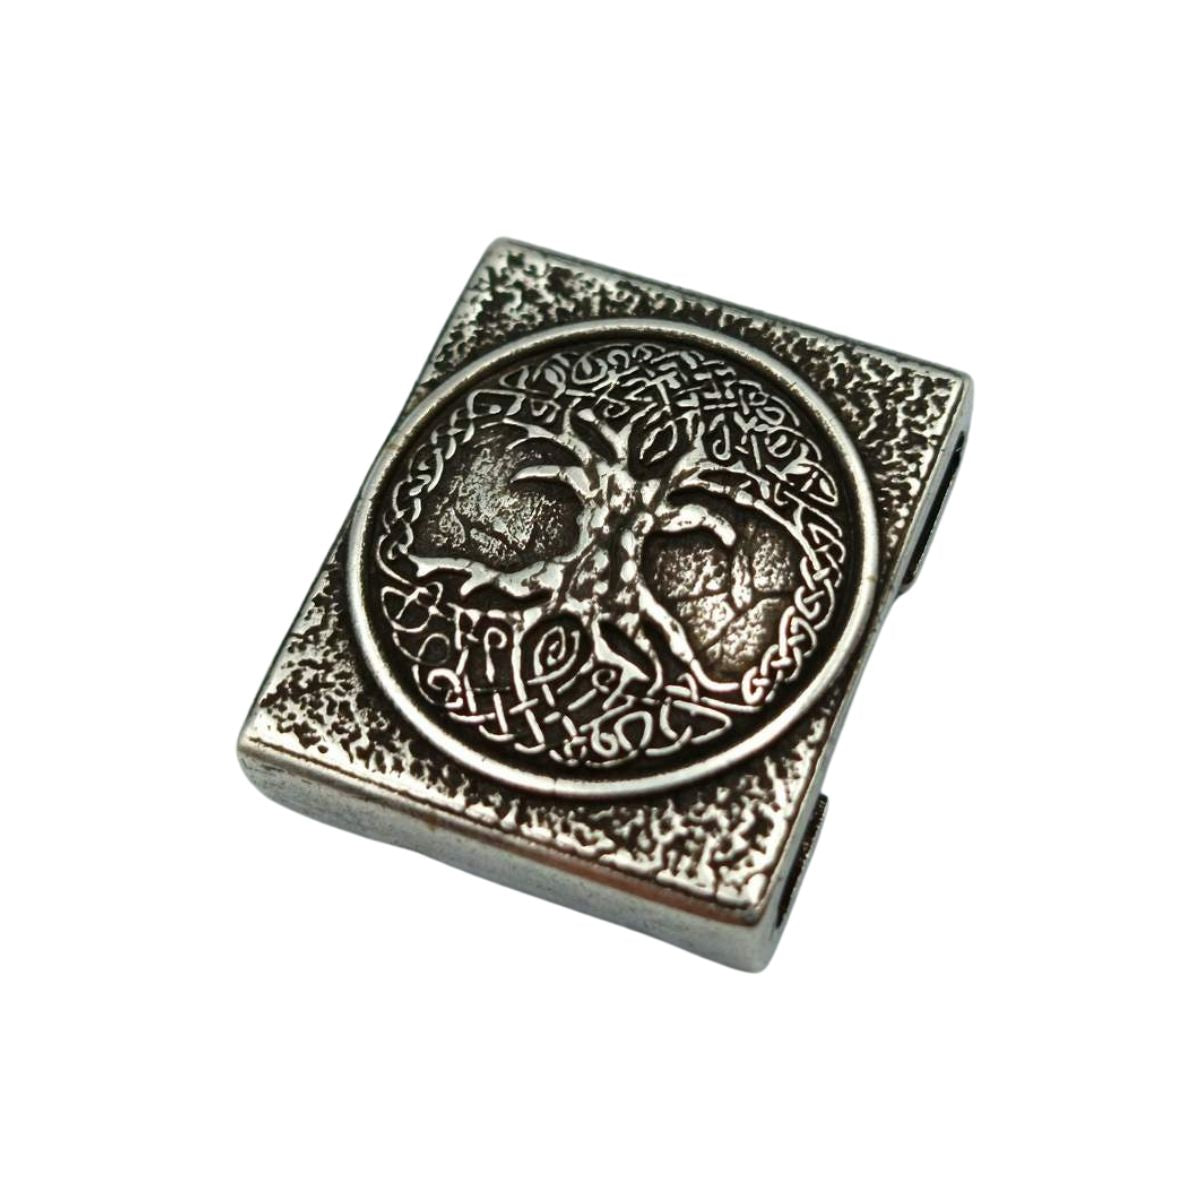 Yggdrasil tree molle clip Silver plated bronze  